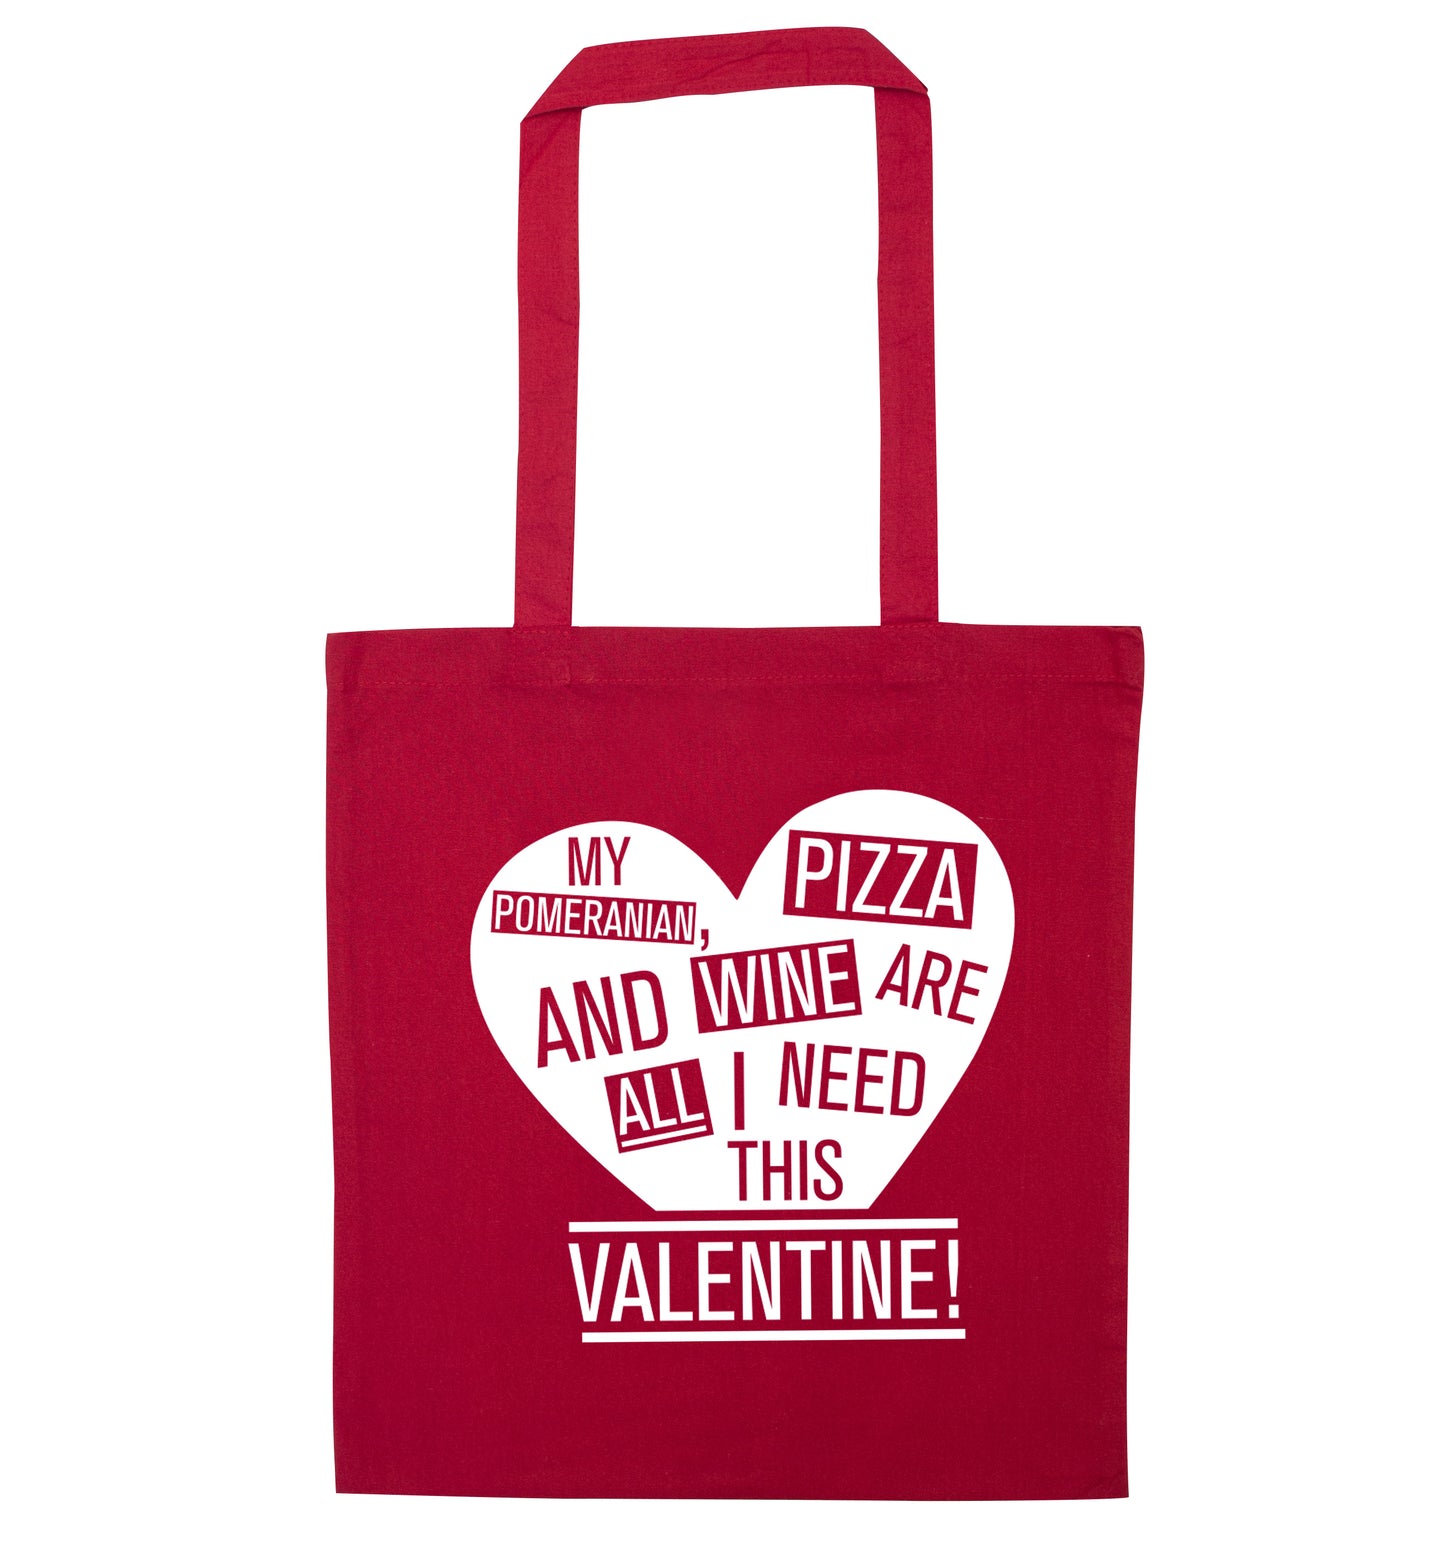 My pomeranian, chocolate and wine are all I need this valentine! red tote bag